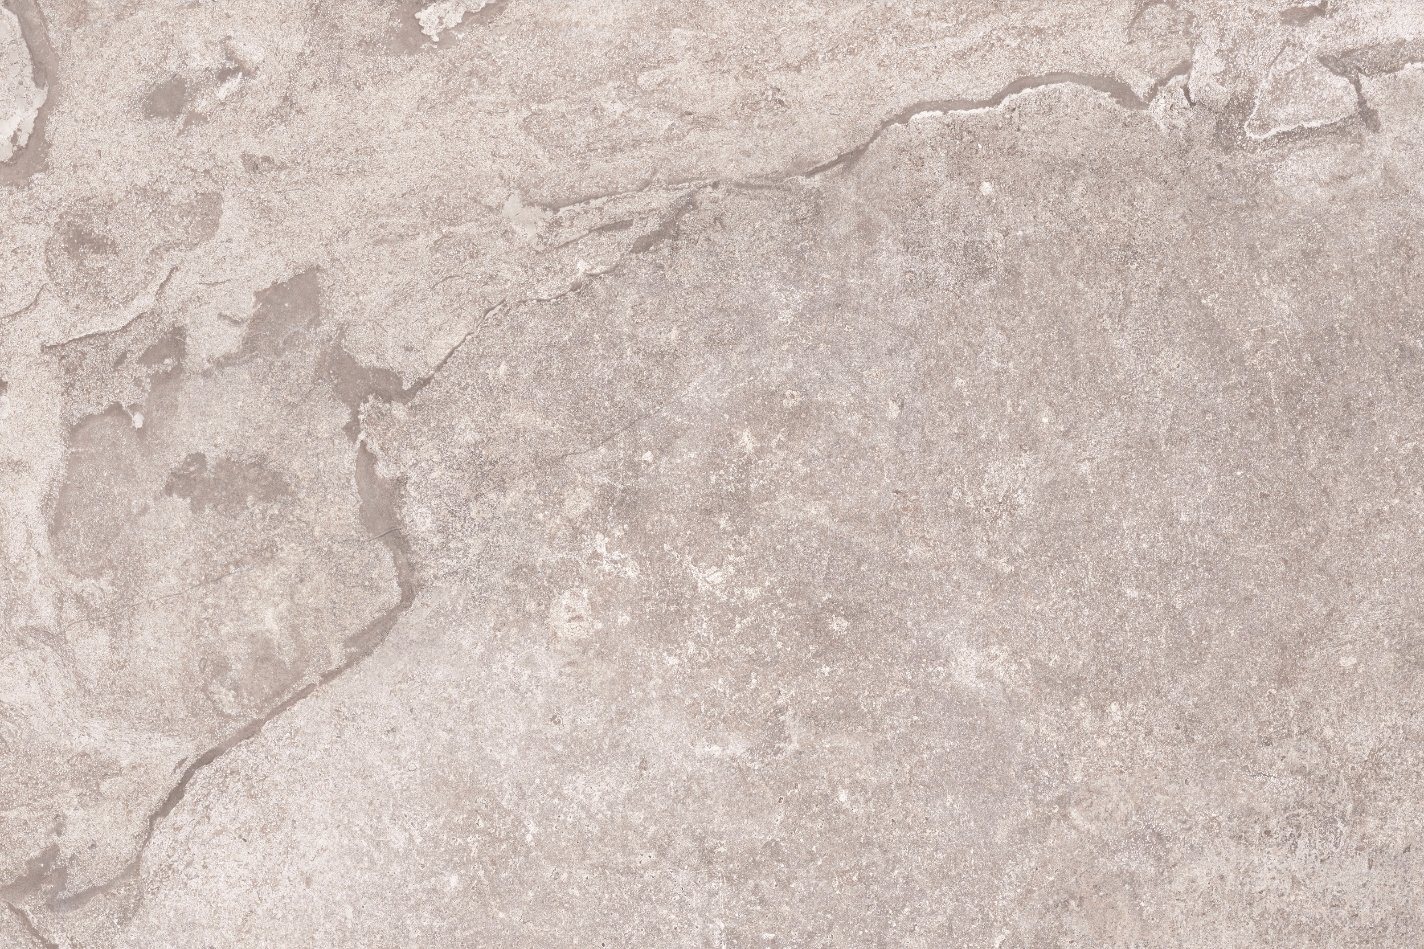 Matt Surface Hot Sale Floor Tile with Three Different Colors